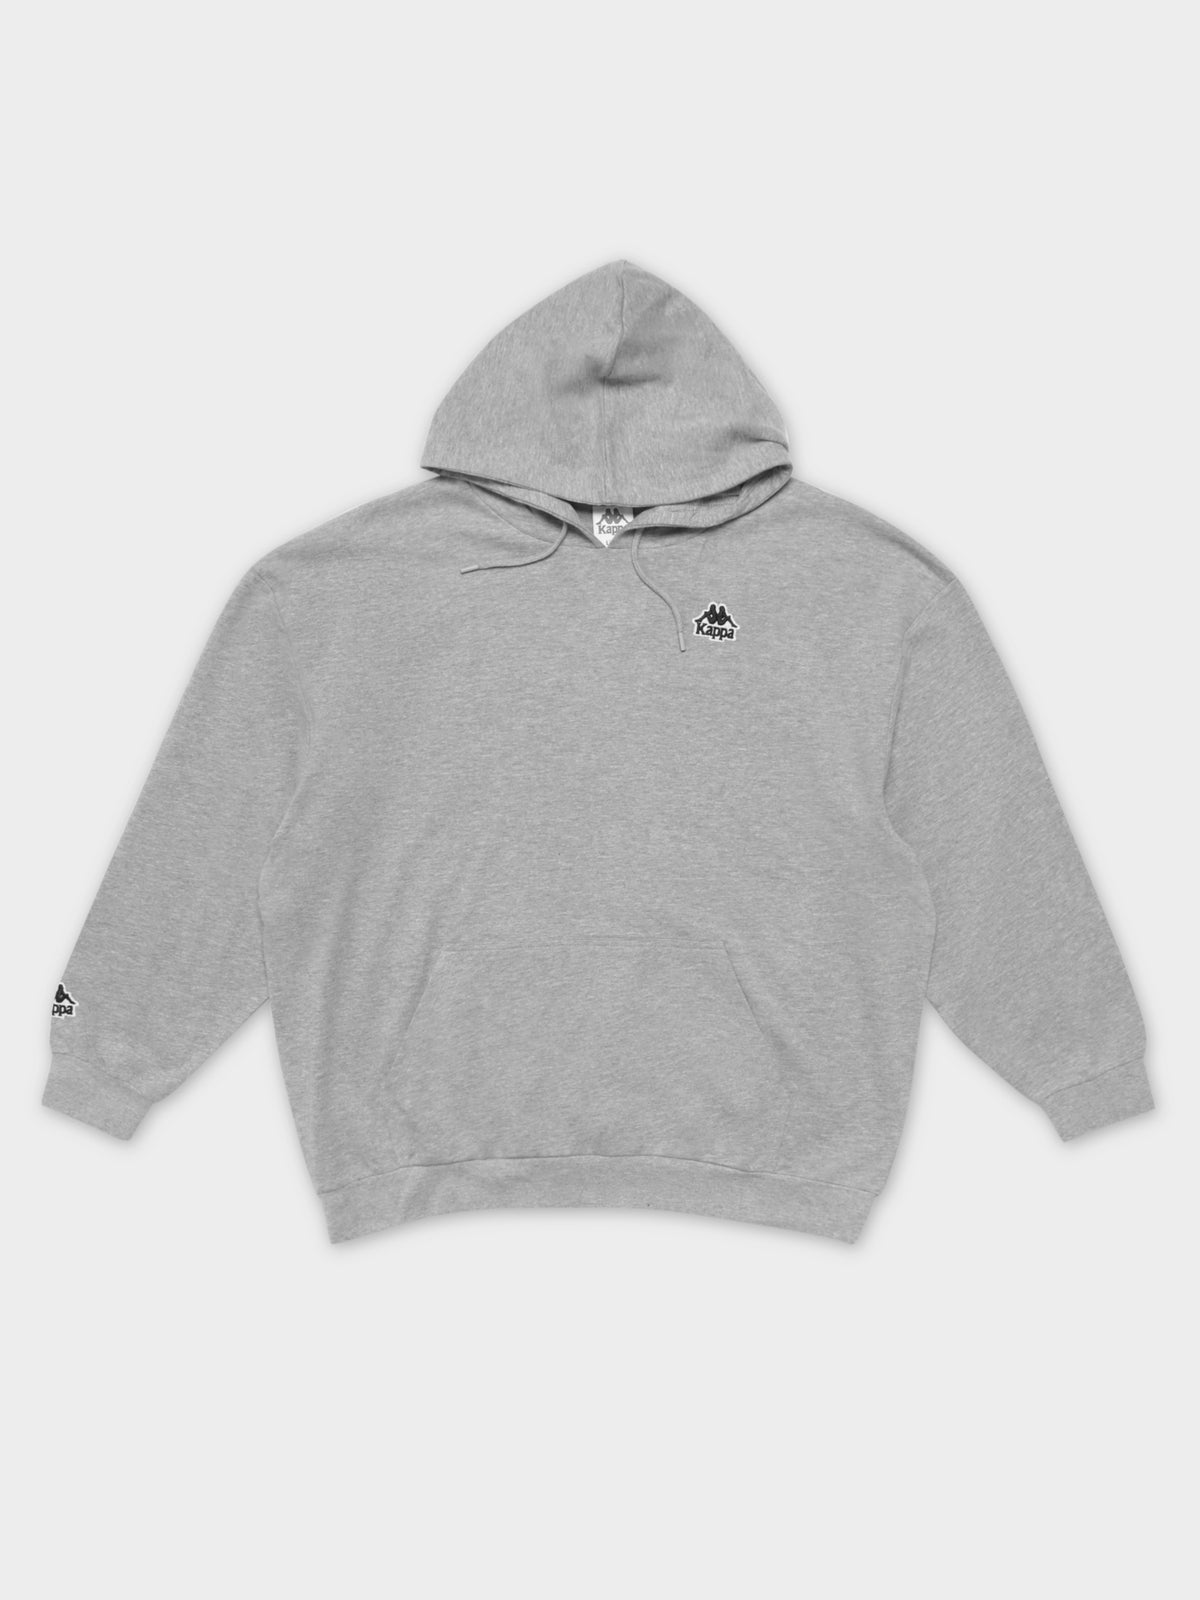 Authentic Tally Hoodie in Grey